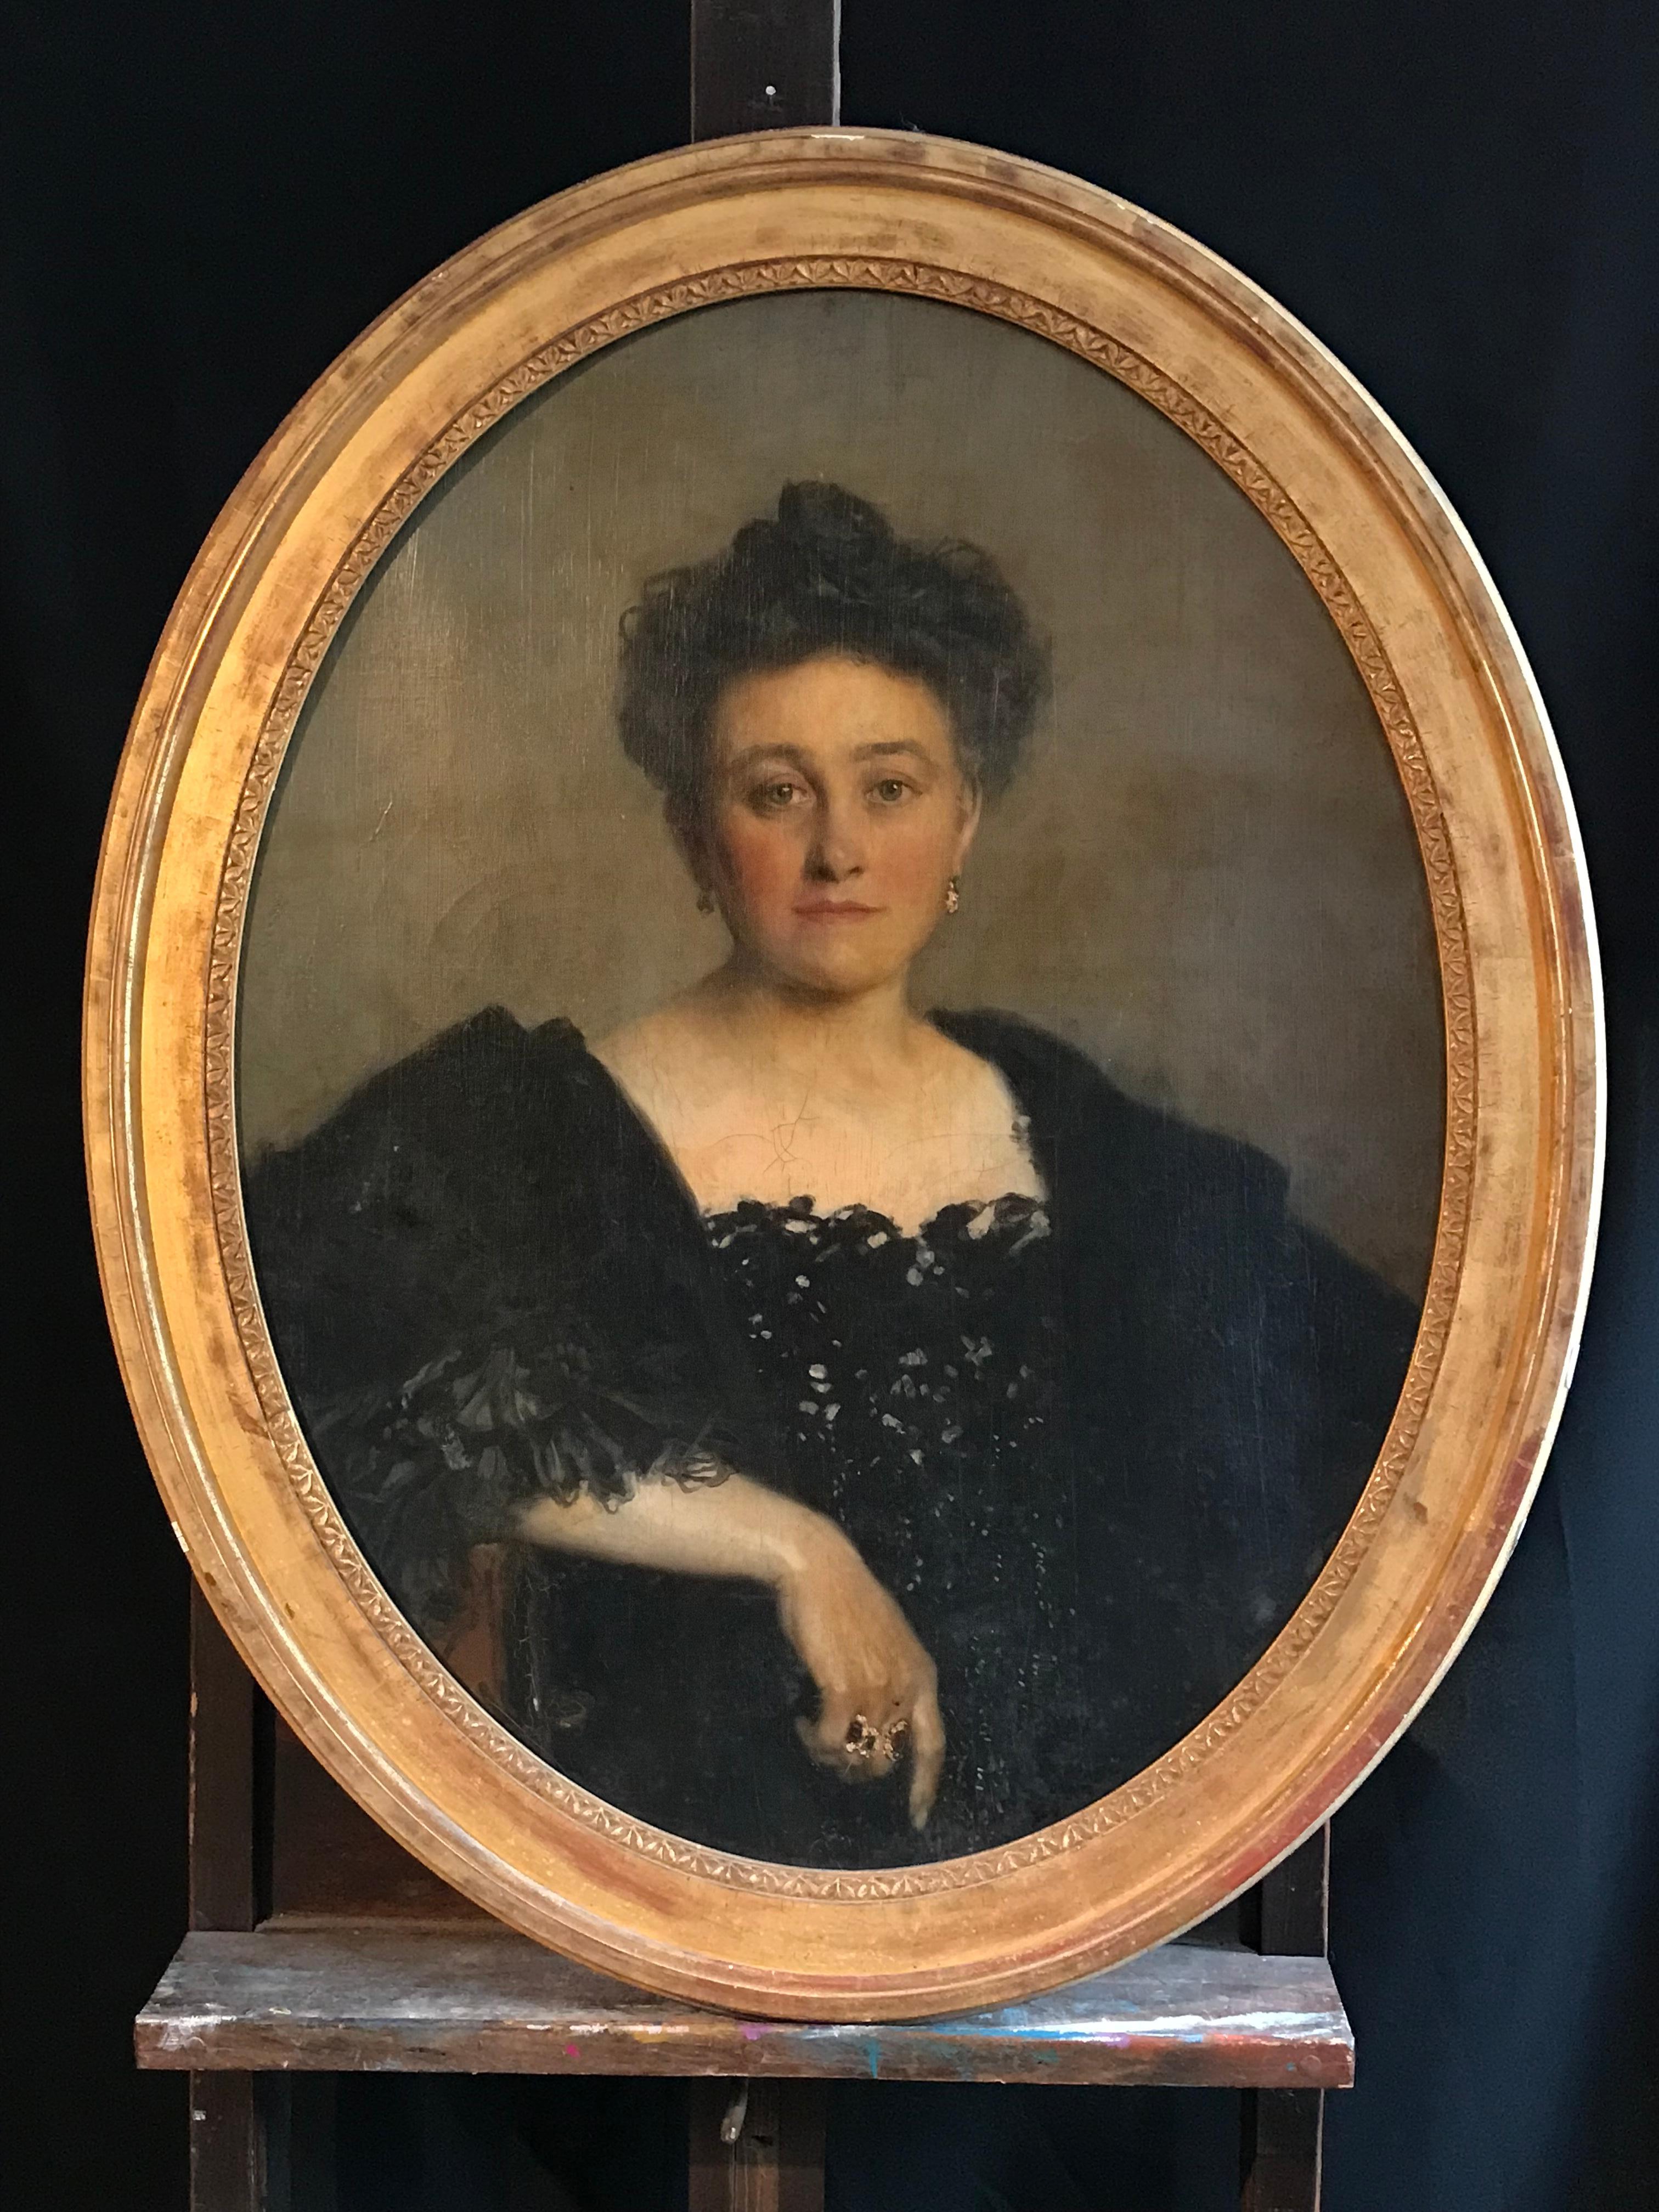 Portrait of a Lady 1904 in a Black Dress, Large Oval Oil on Canvas - Painting by François Flameng